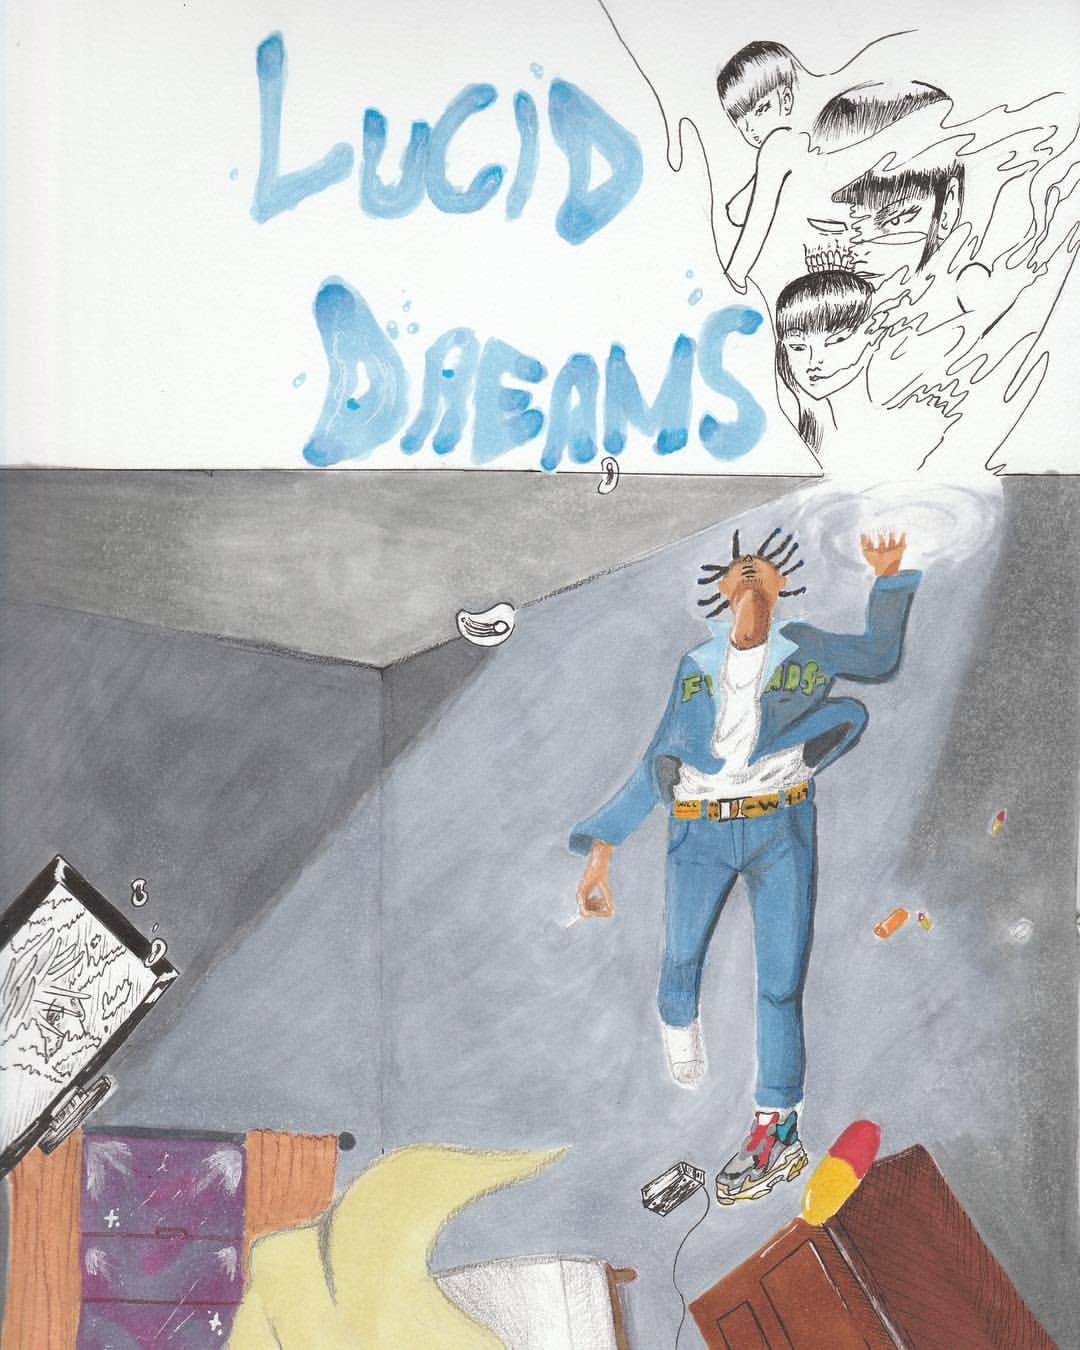 Juice wrld lucid dreams poster. Products. Room, Lucid dreaming, Poster